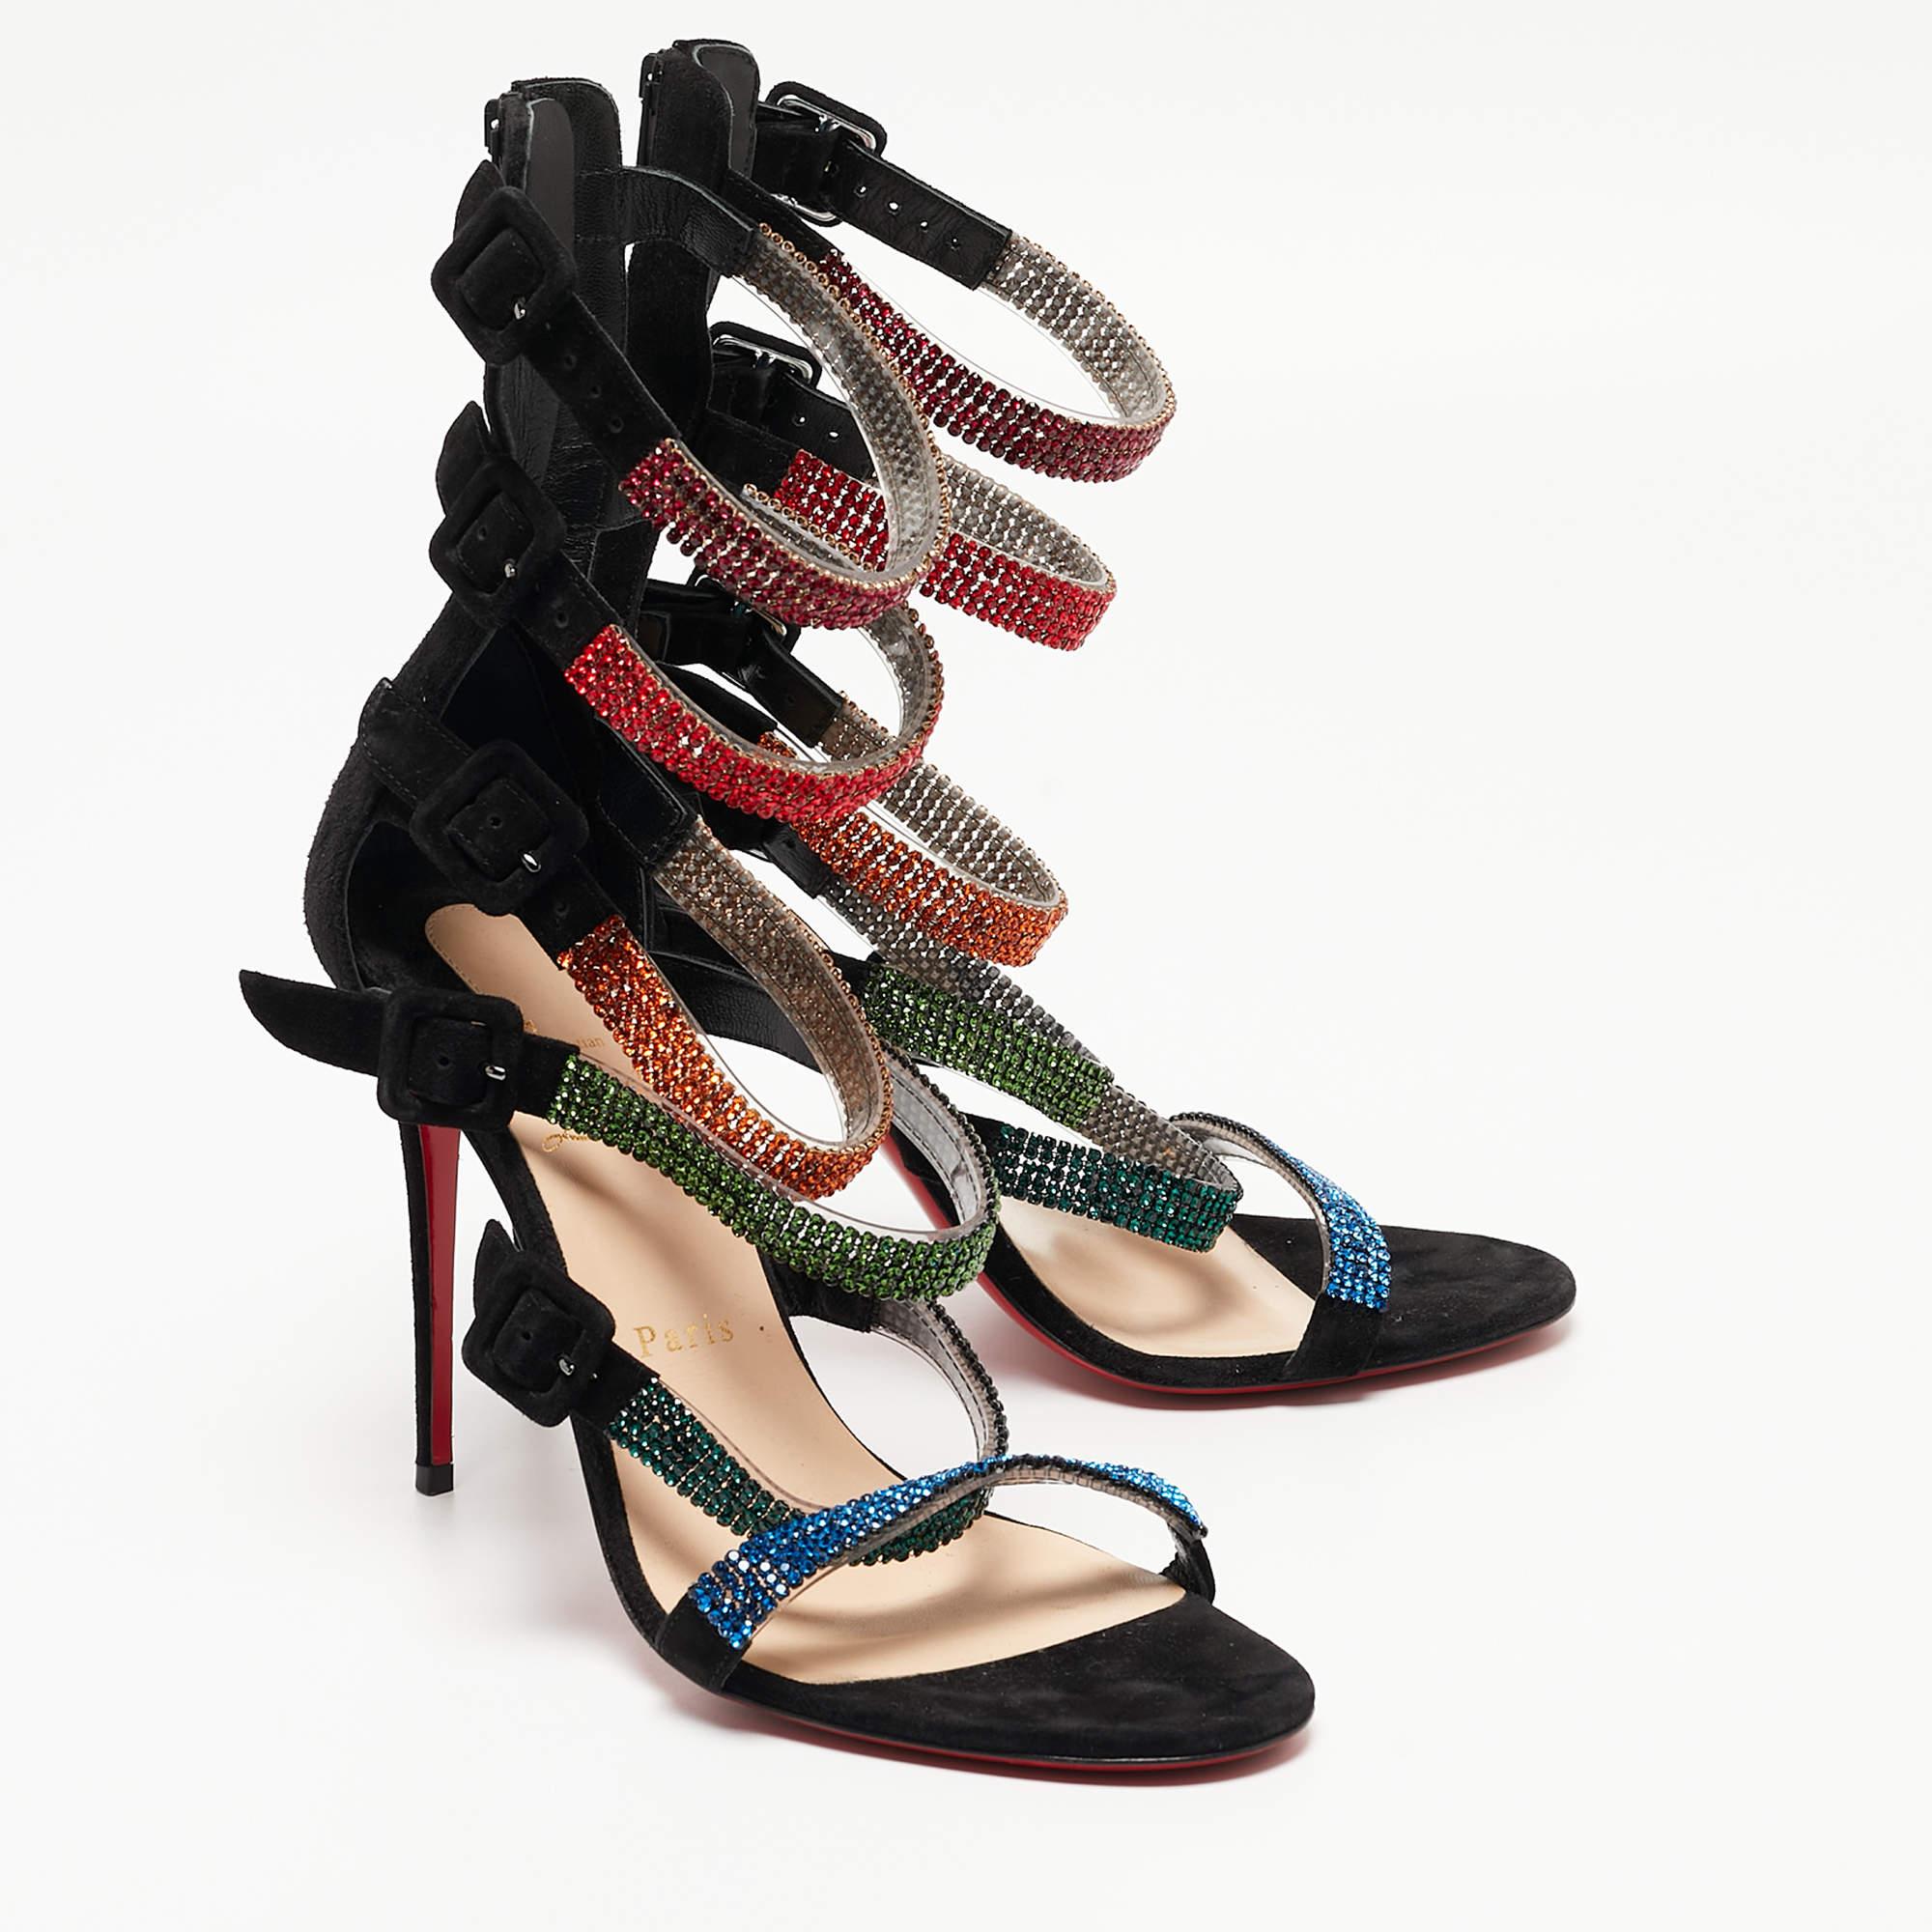 Christian Louboutin Black Suede Raynibo Sandals Size 40 In Good Condition For Sale In Dubai, Al Qouz 2